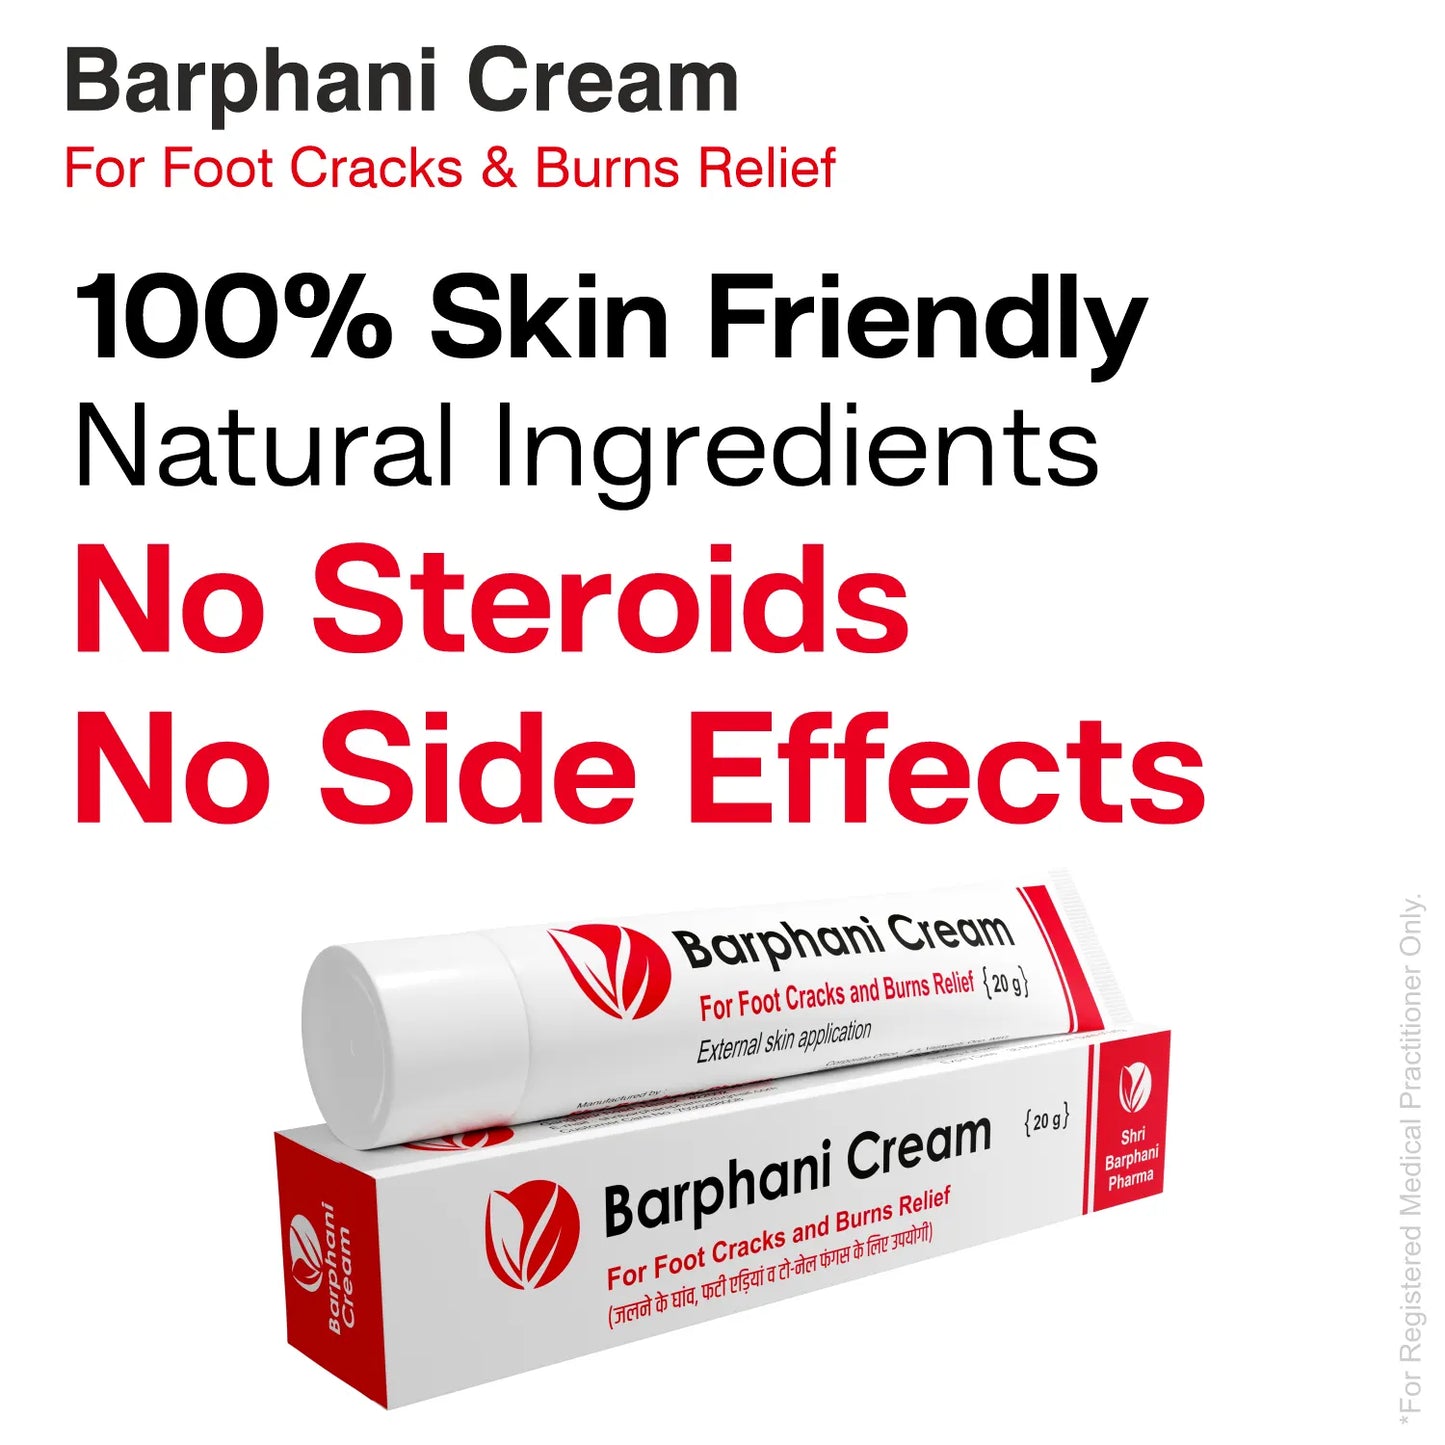 Barphani Cream for Burns Relief 100g - Ultimate Burn patches wound relief solution quick recovery dark spots removal helps gain original skin color